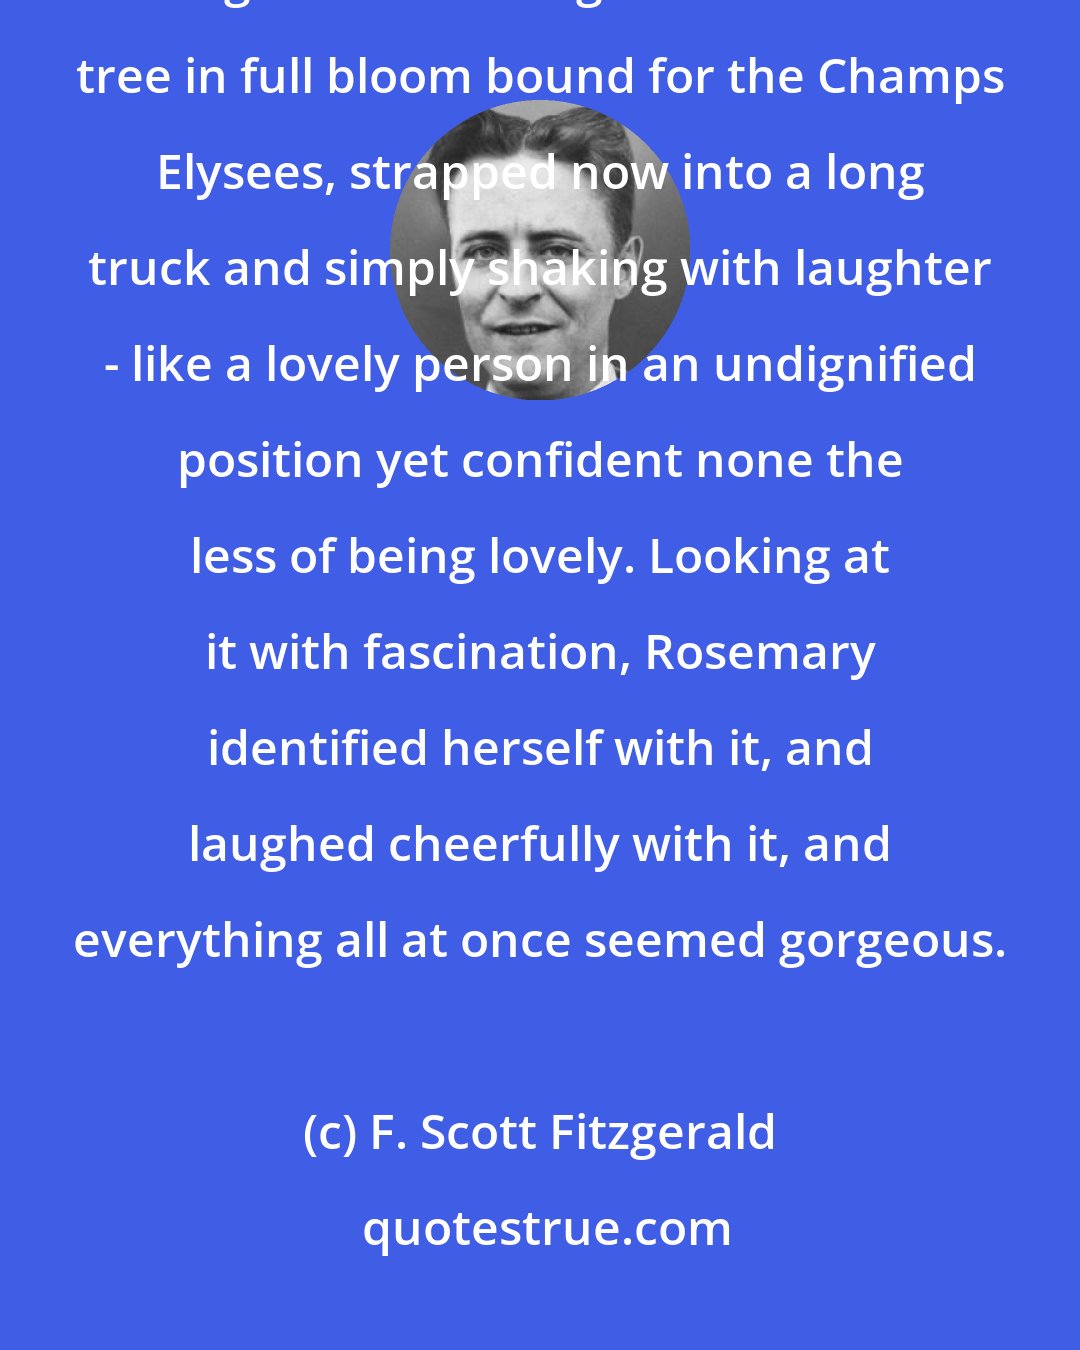 F. Scott Fitzgerald: She felt a little betrayed and sad, but presently a moving object came into sight. It was a huge horse-chestnut tree in full bloom bound for the Champs Elysees, strapped now into a long truck and simply shaking with laughter - like a lovely person in an undignified position yet confident none the less of being lovely. Looking at it with fascination, Rosemary identified herself with it, and laughed cheerfully with it, and everything all at once seemed gorgeous.